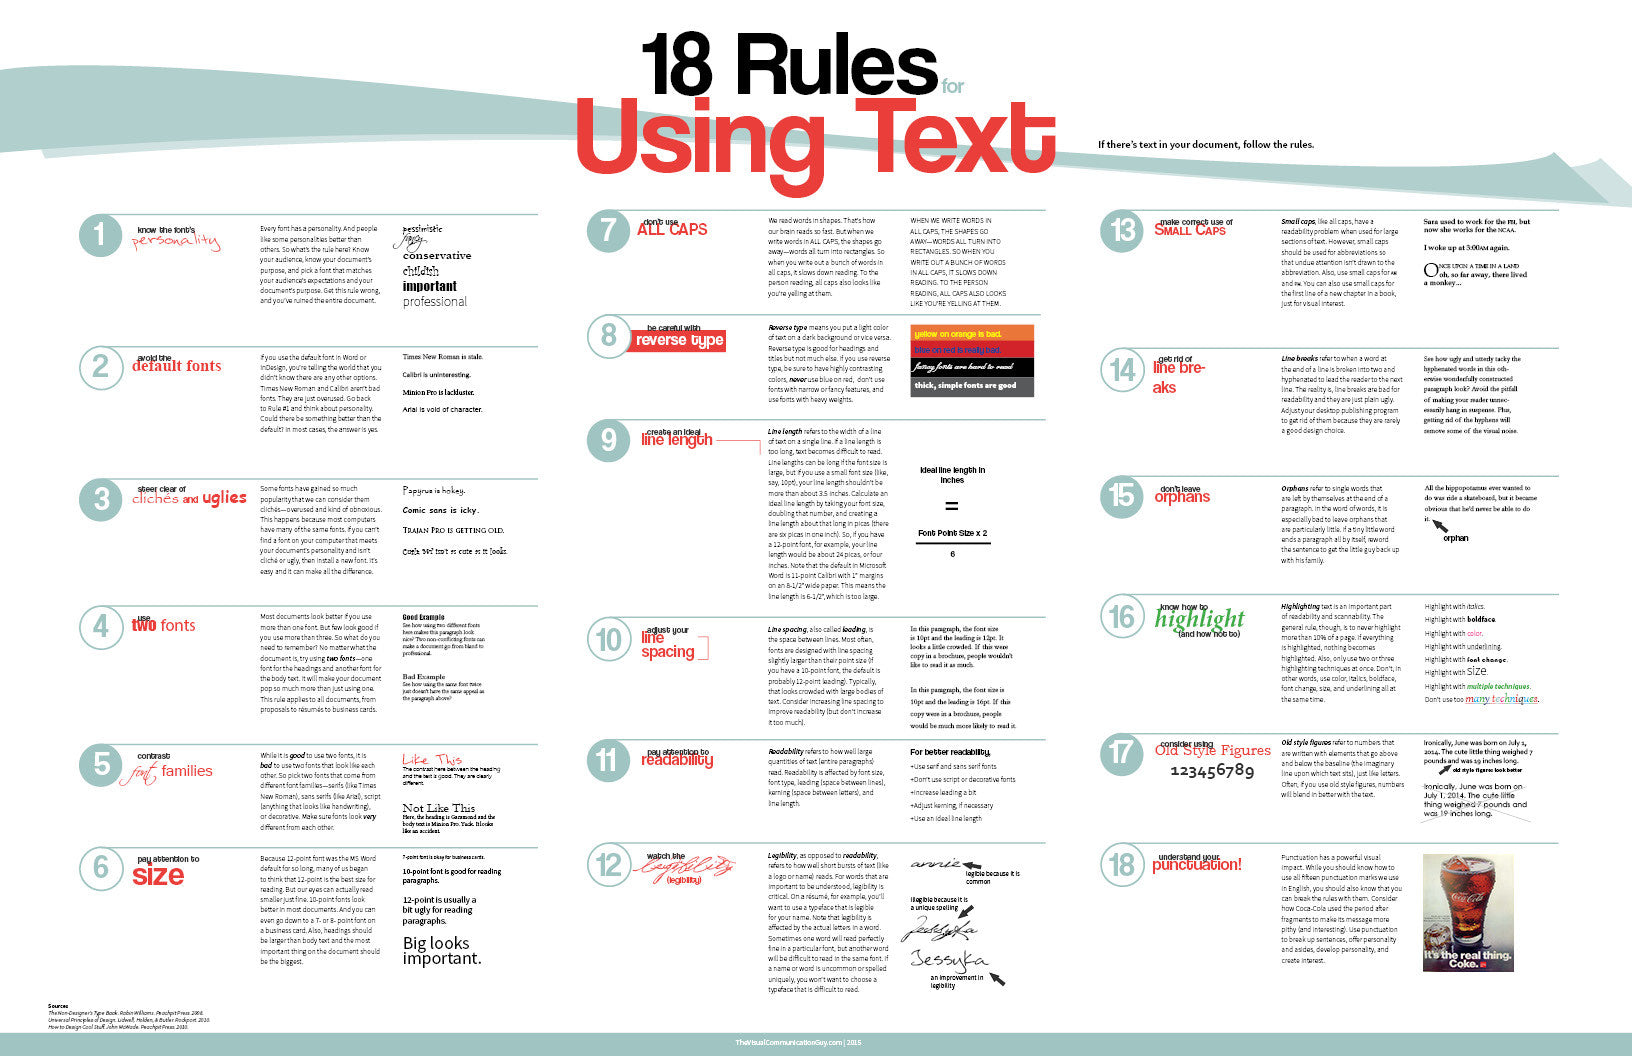 18 Rules for Using Text 20x30  Poster Print